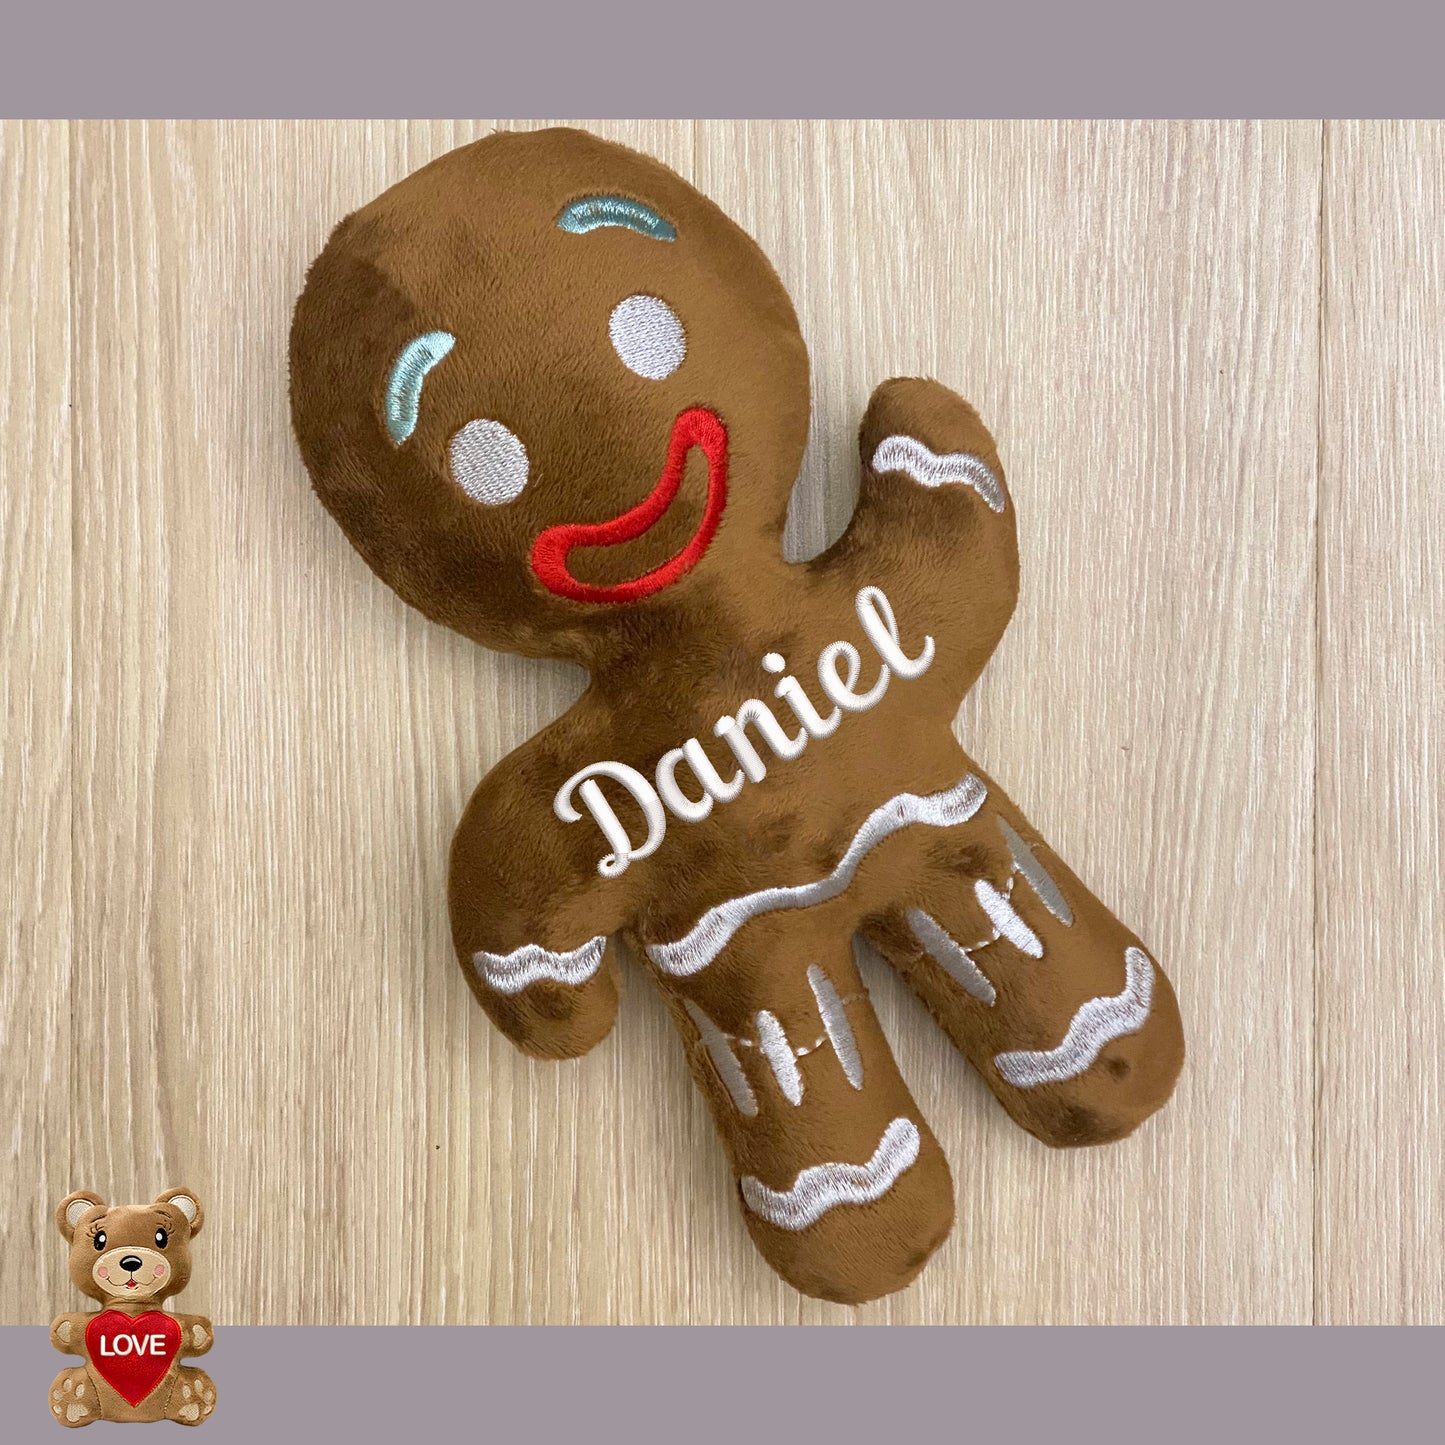 Personalised Gingerbread Stuffed toy ,Super cute personalised soft plush toy, Personalised Gift, Unique Personalized Birthday Gifts , Custom Gifts For Children